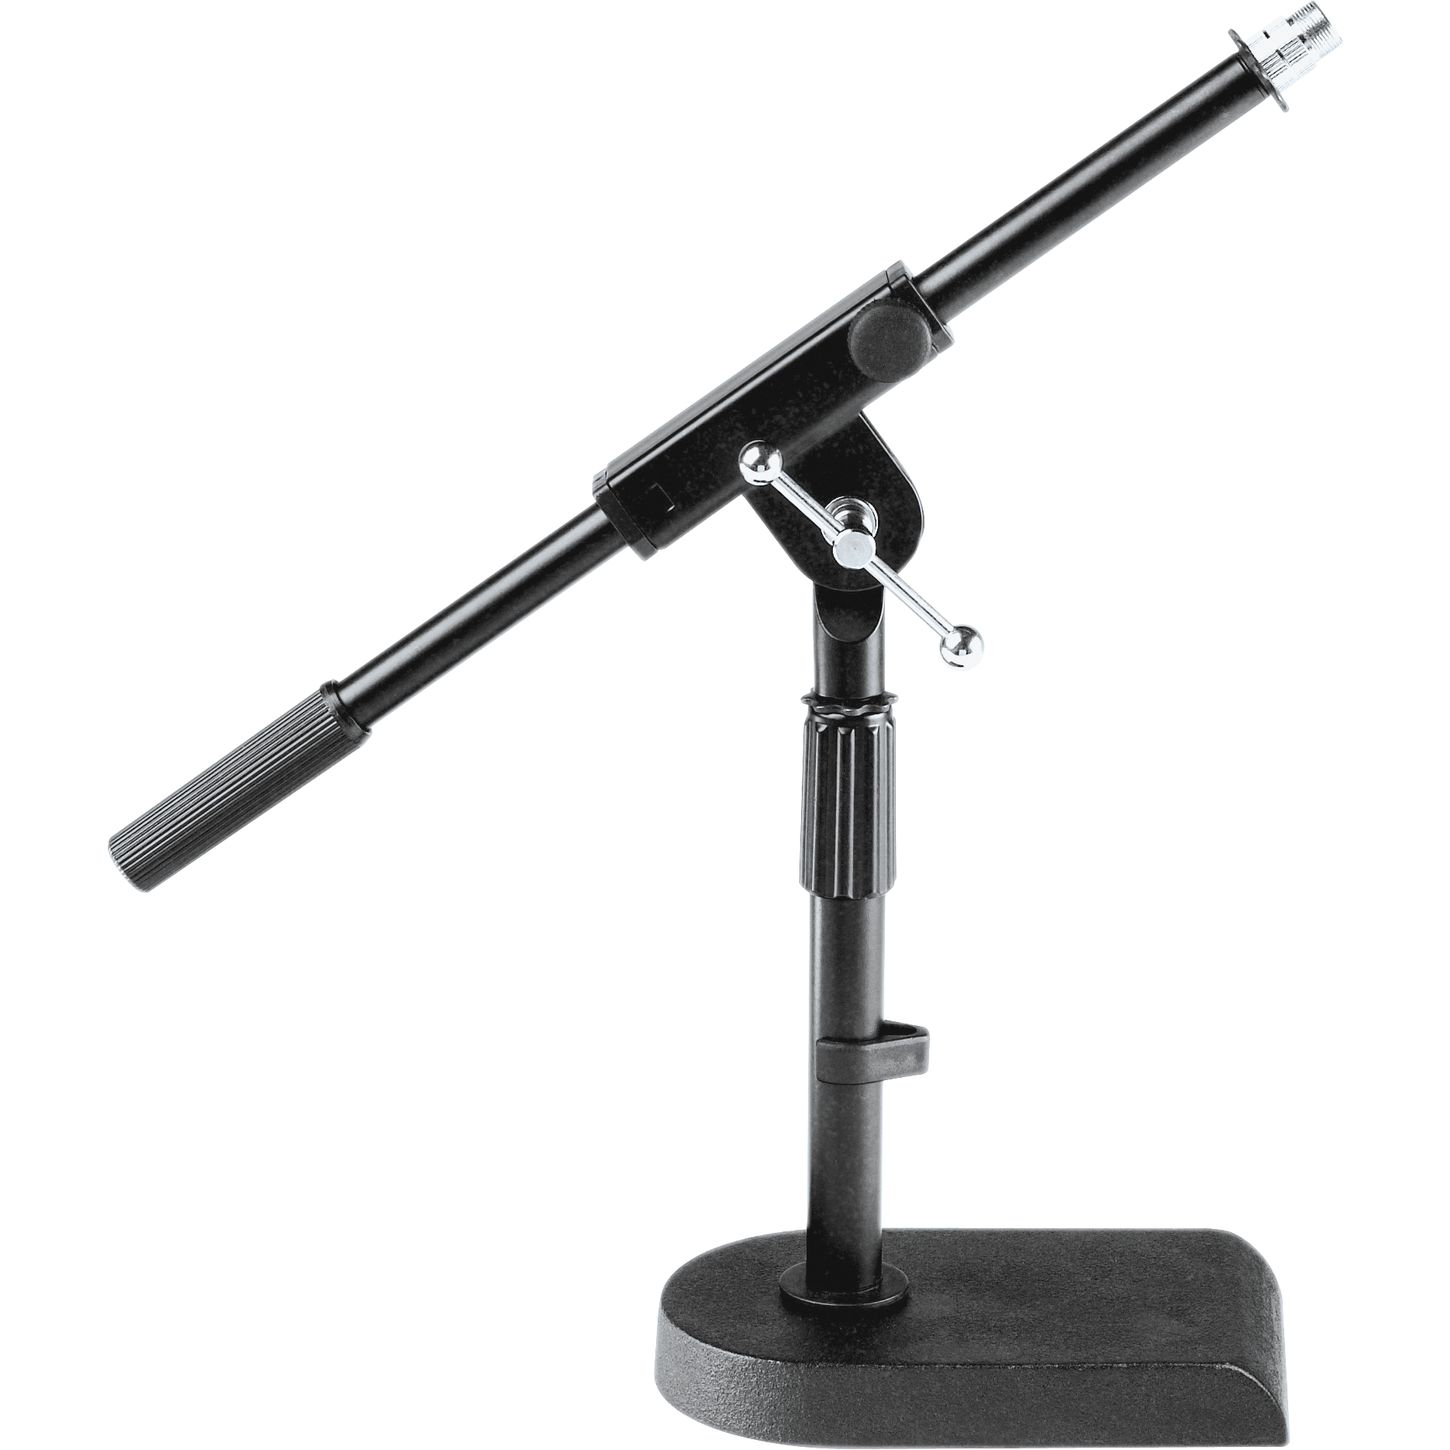 Microphone Stand Parts And Accessories